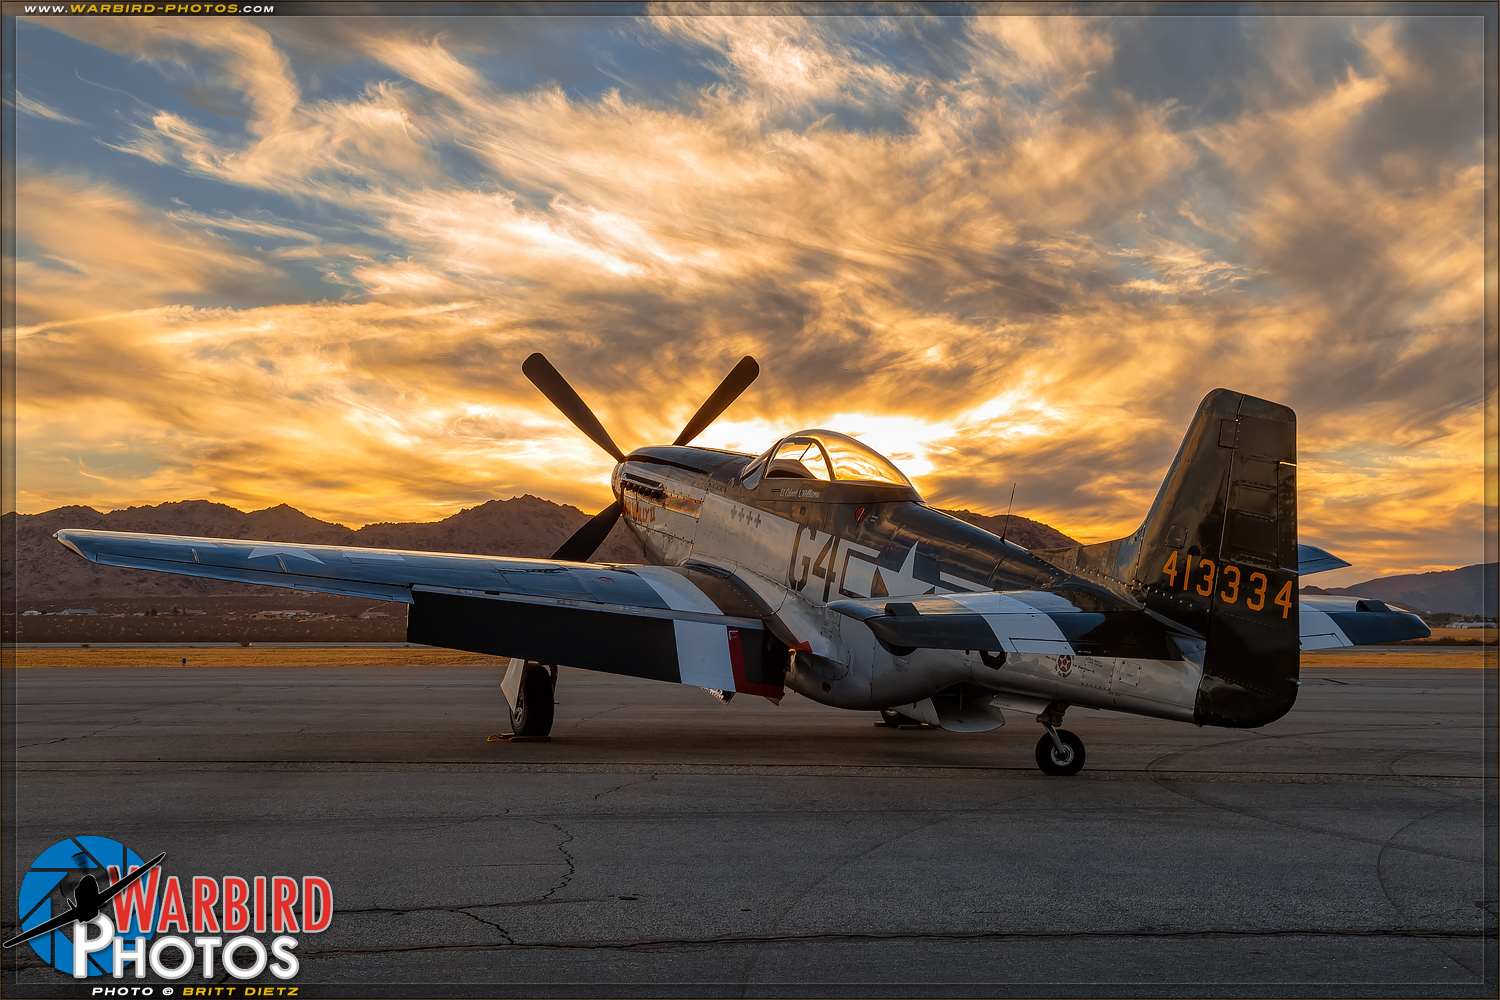 Apple Valley Airshow 2016 - October 8, 2016